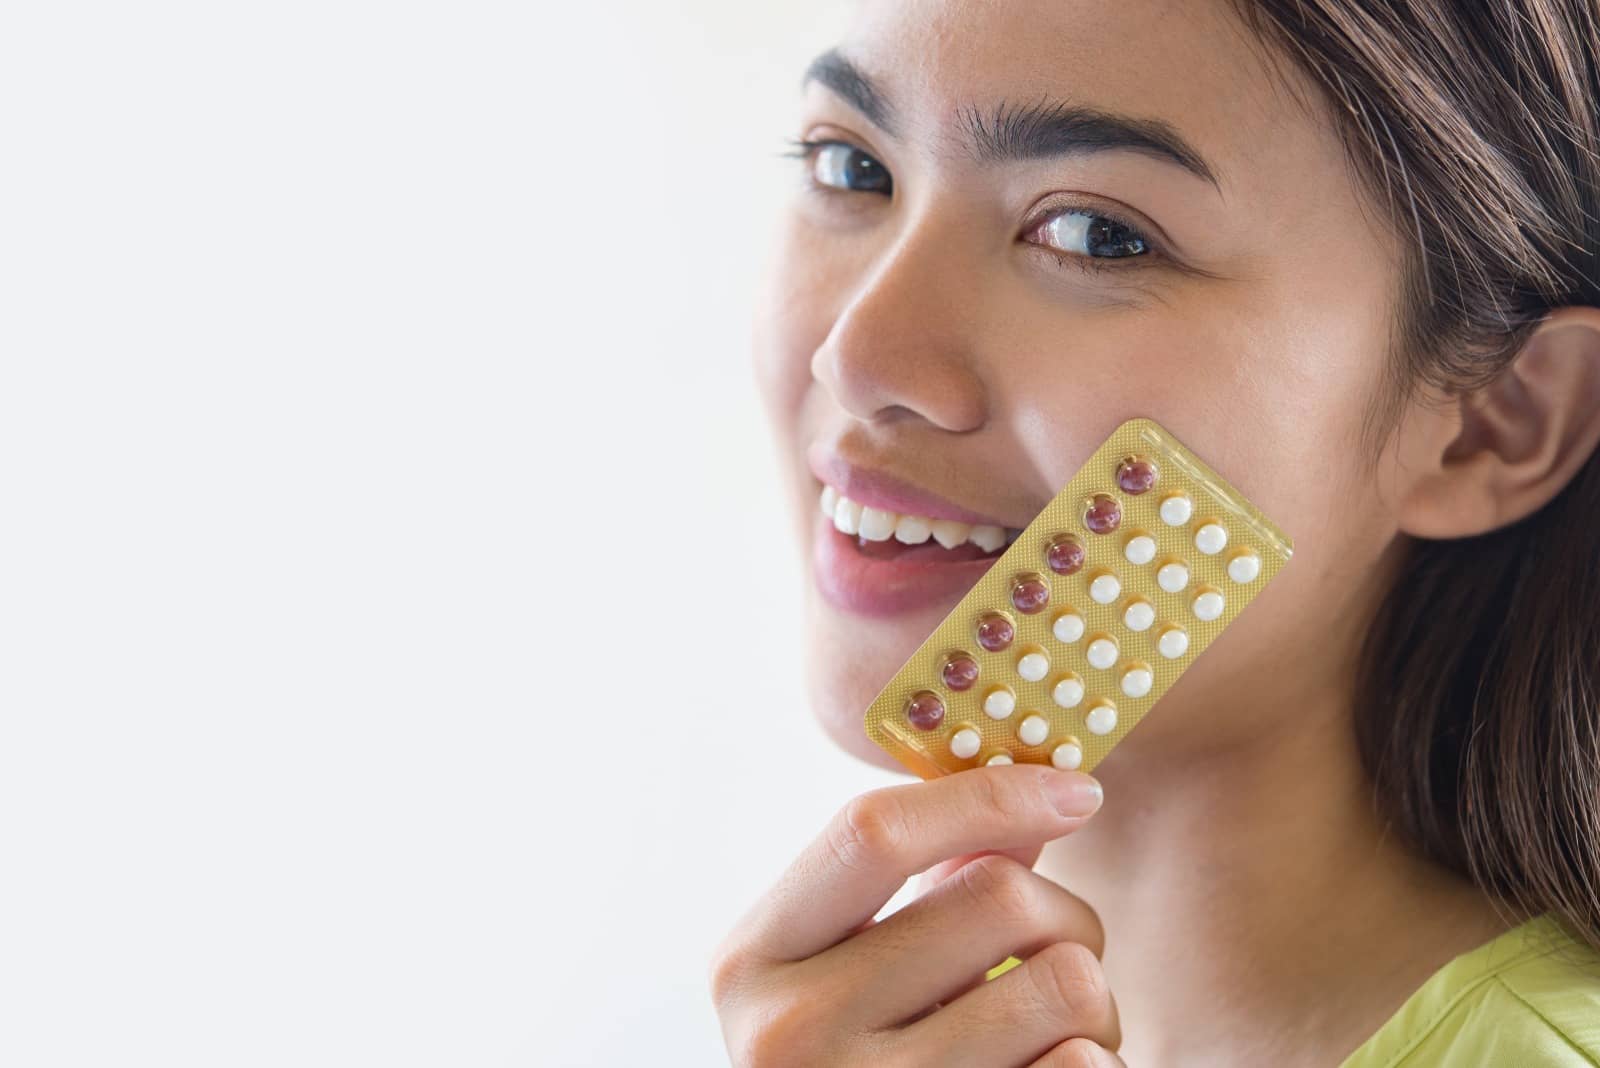 Addressing acne issues through contraception